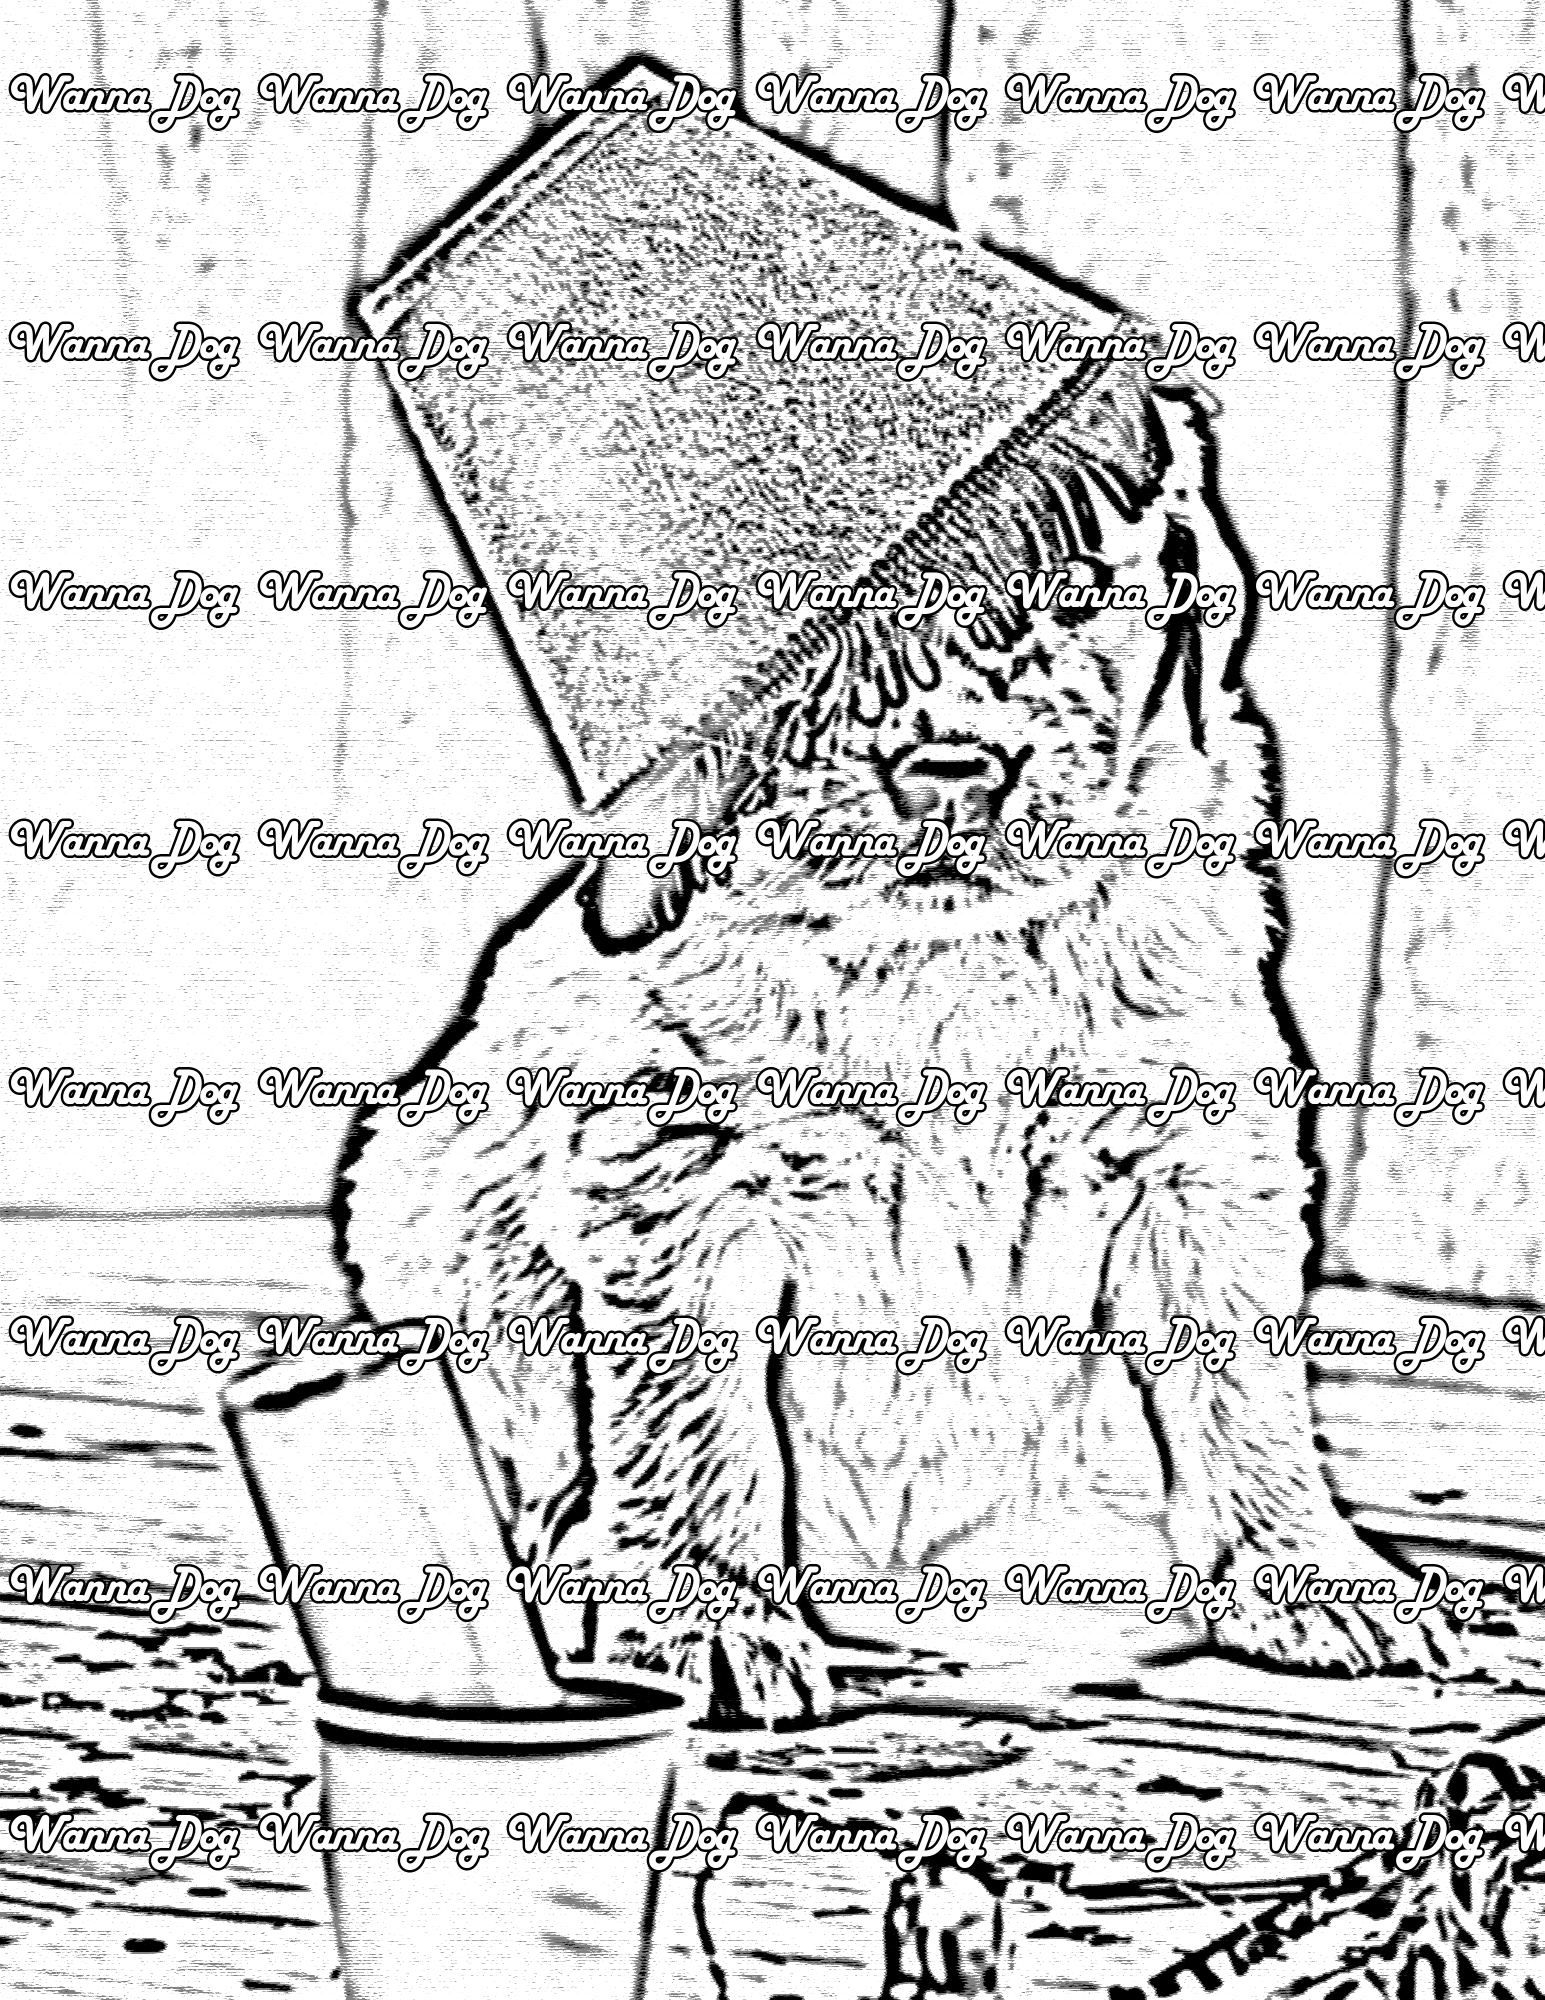 Golden Retriever Puppy Coloring Page of a Golden Retriever Puppy with a lamp shade on their head